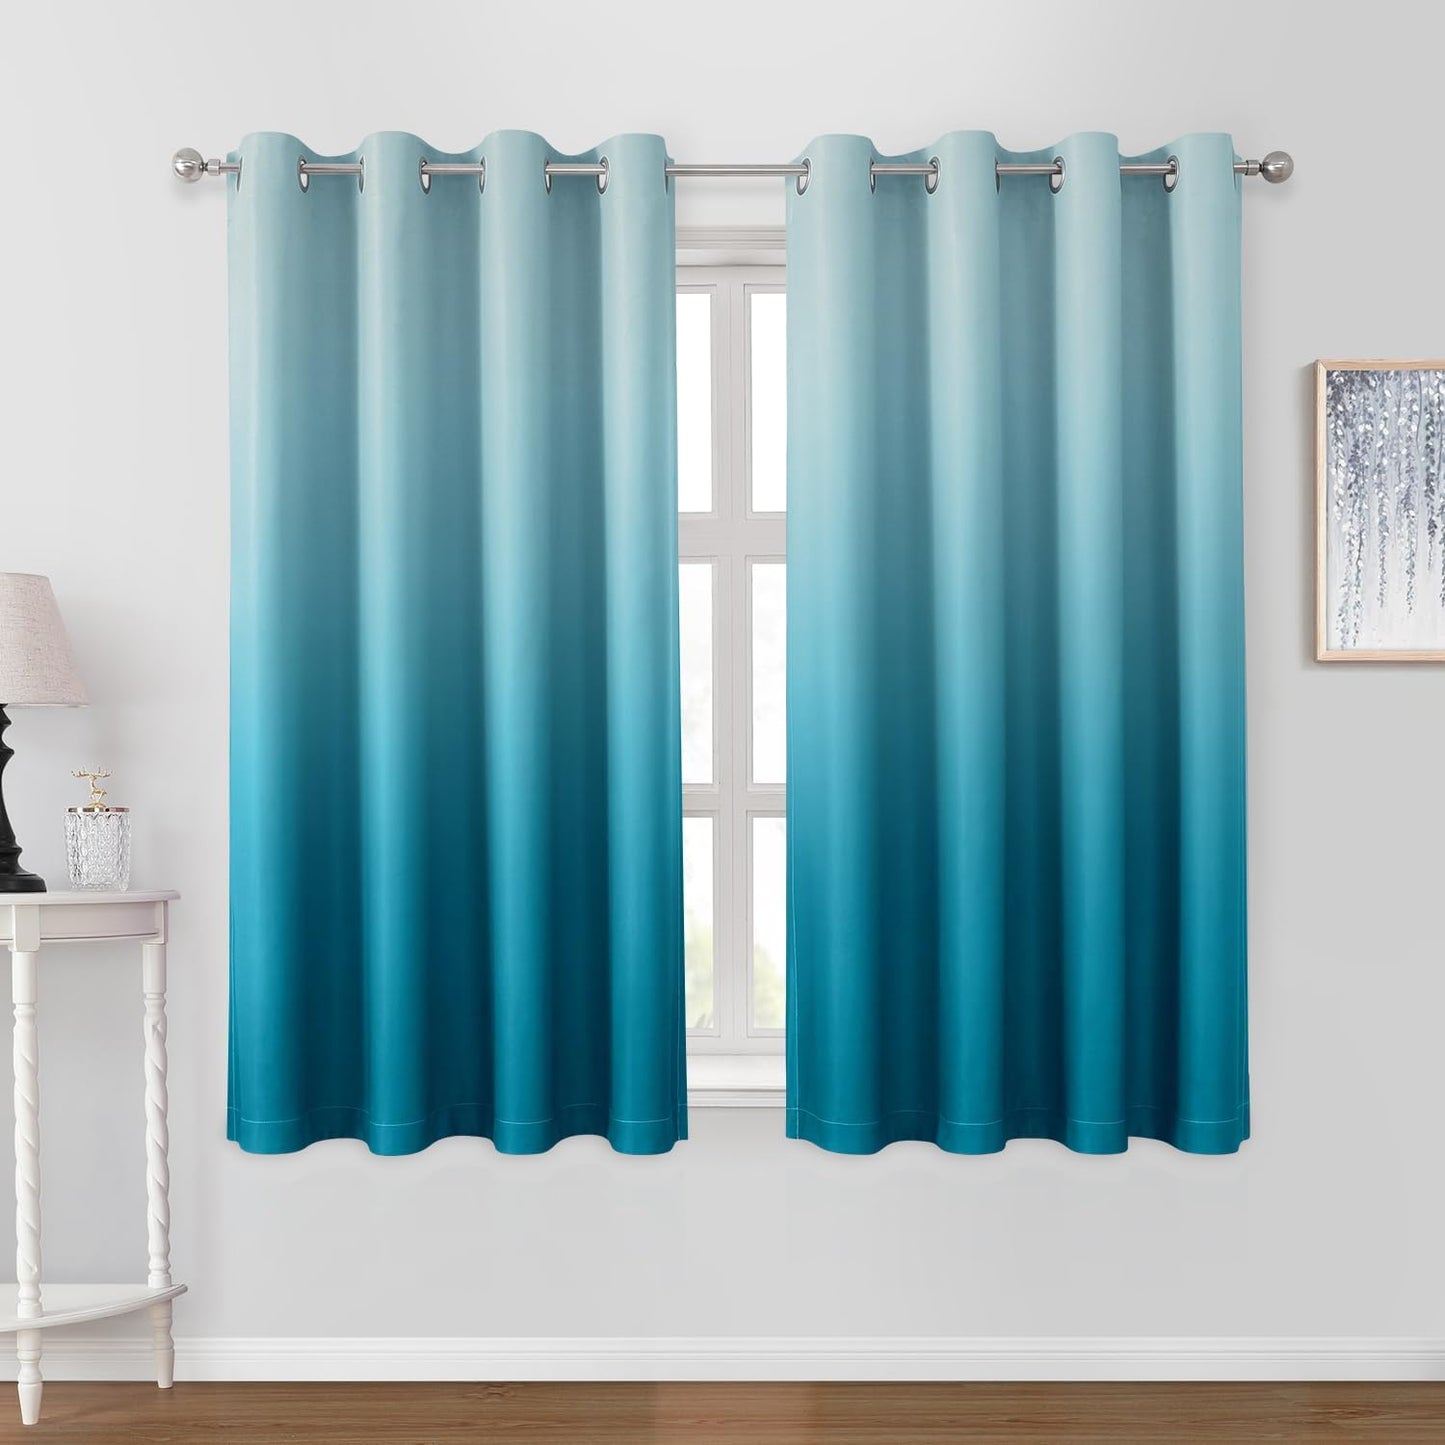 HOMEIDEAS Navy Blue Ombre Blackout Curtains 52 X 84 Inch Length Gradient Room Darkening Thermal Insulated Energy Saving Grommet 2 Panels Window Drapes for Living Room/Bedroom  HOMEIDEAS Turquoise 52"W X 63"L 